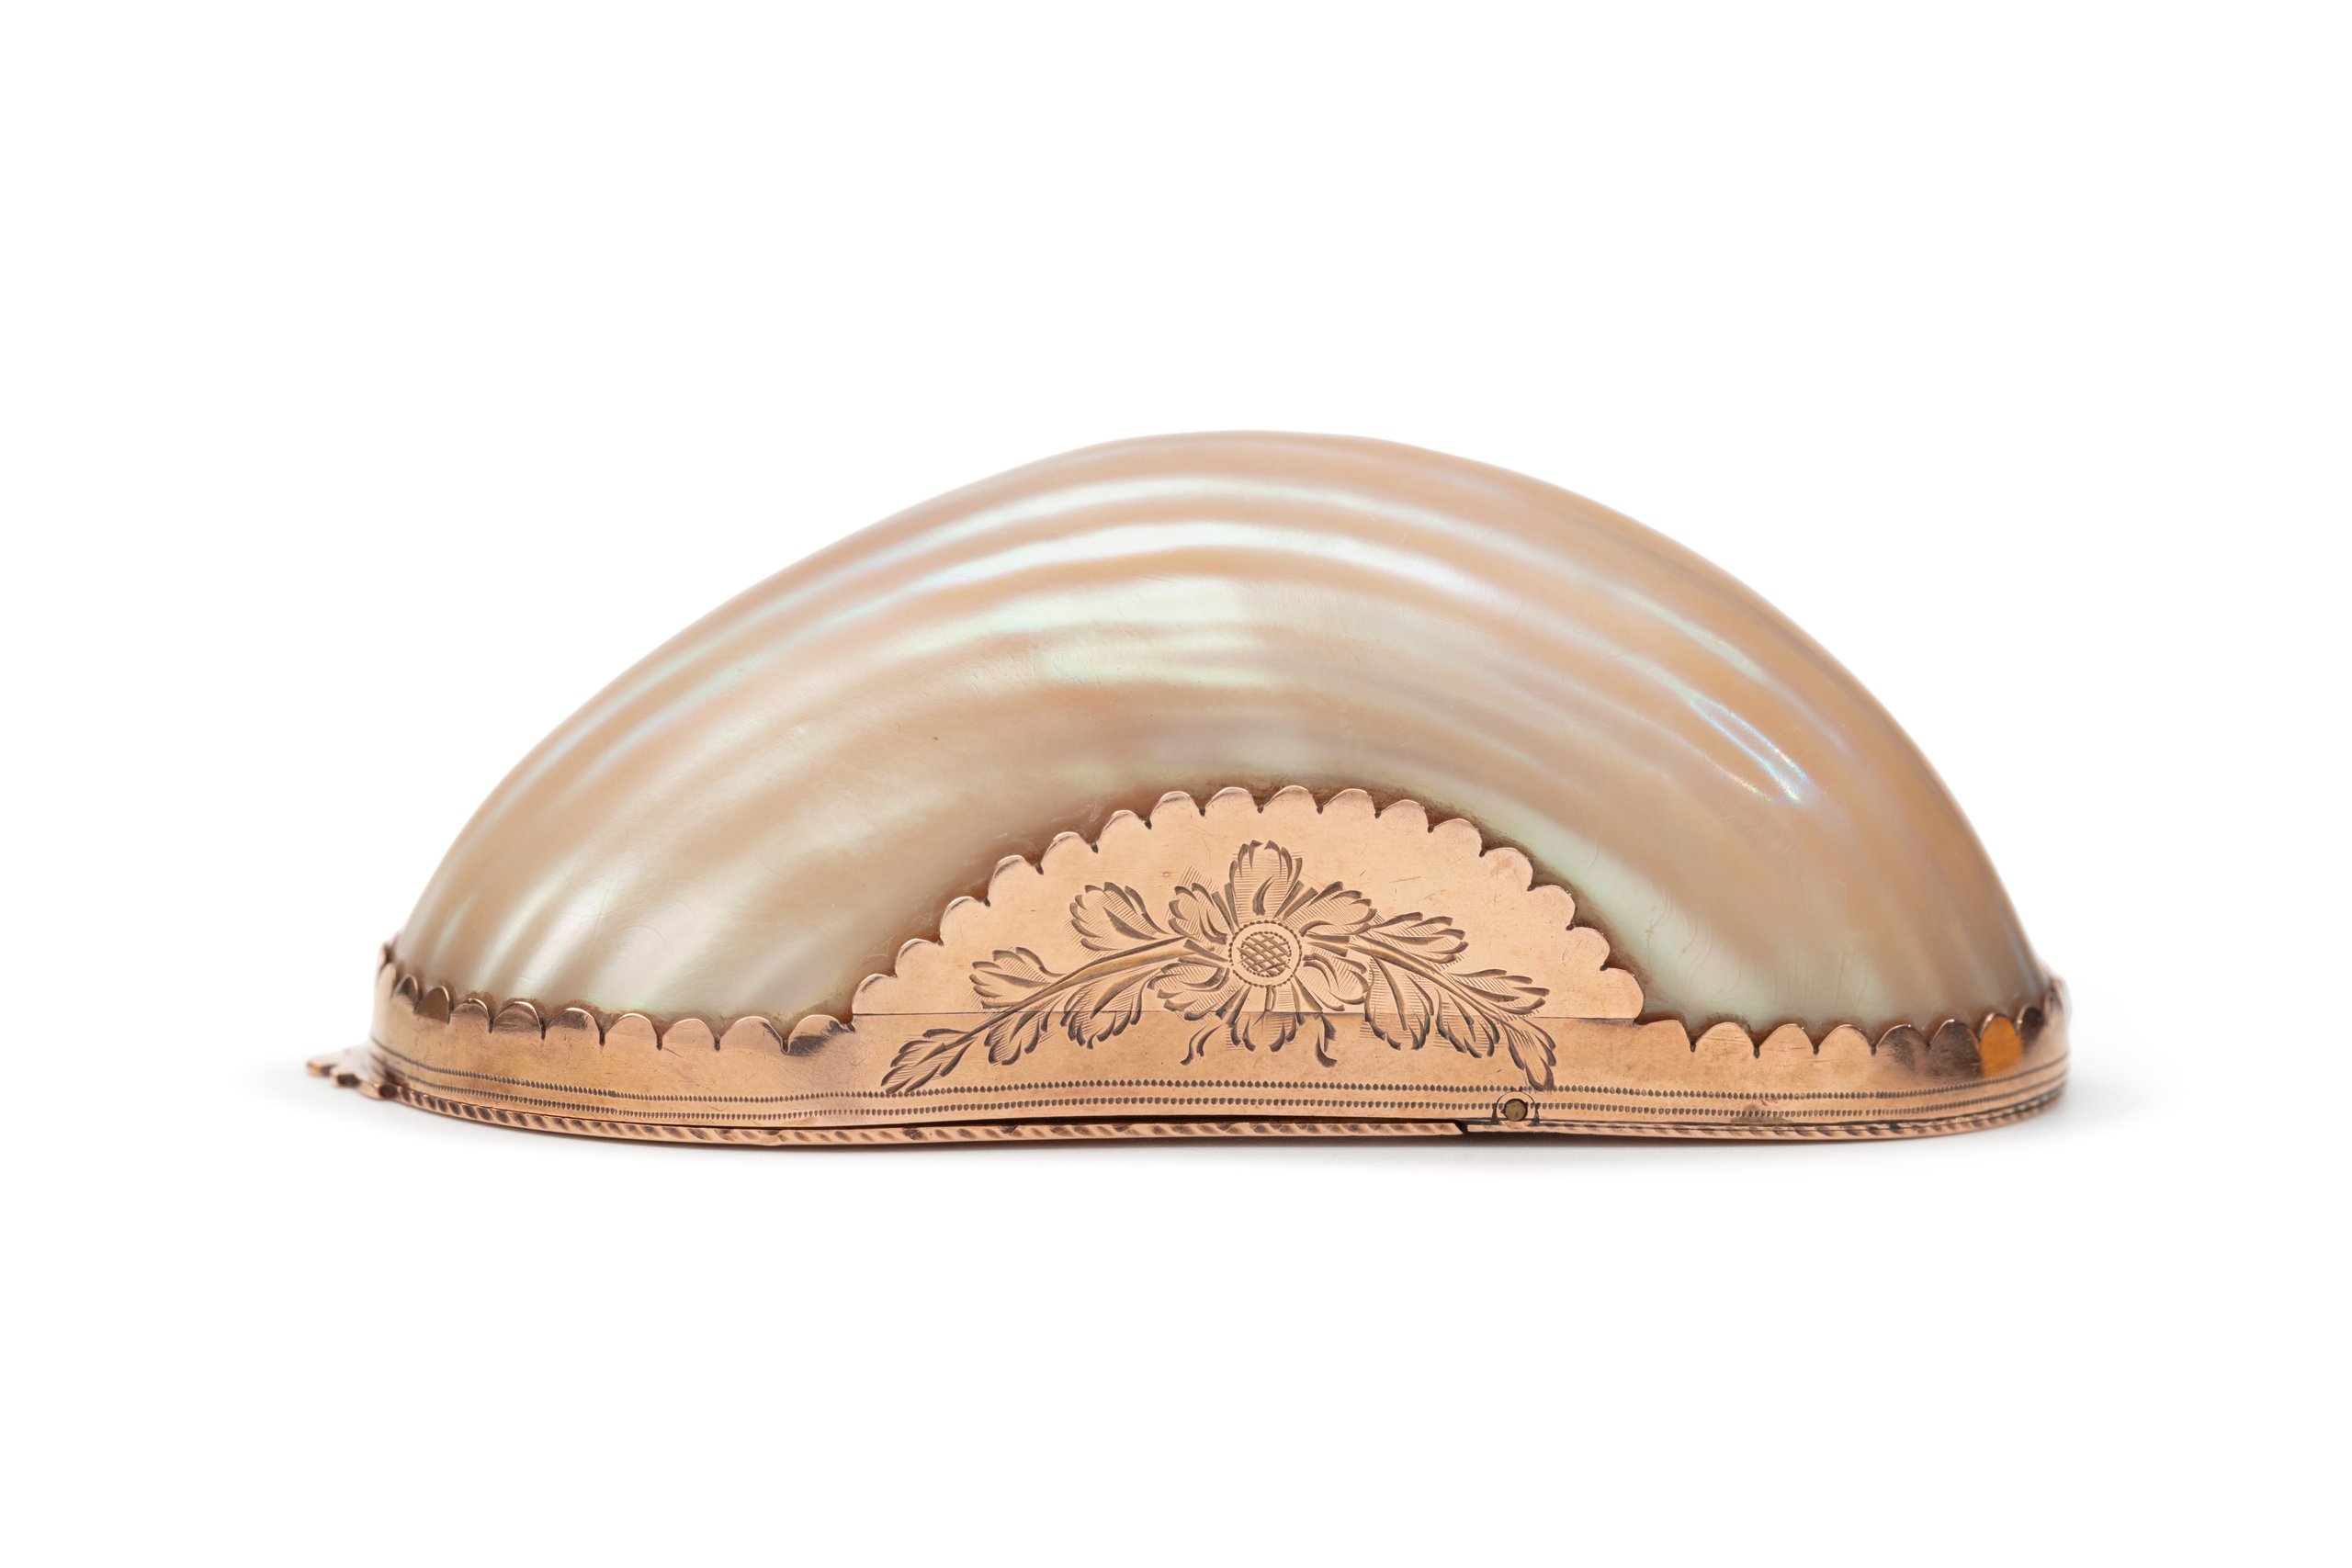 Snuff box attributed to Ferdinand Meurant